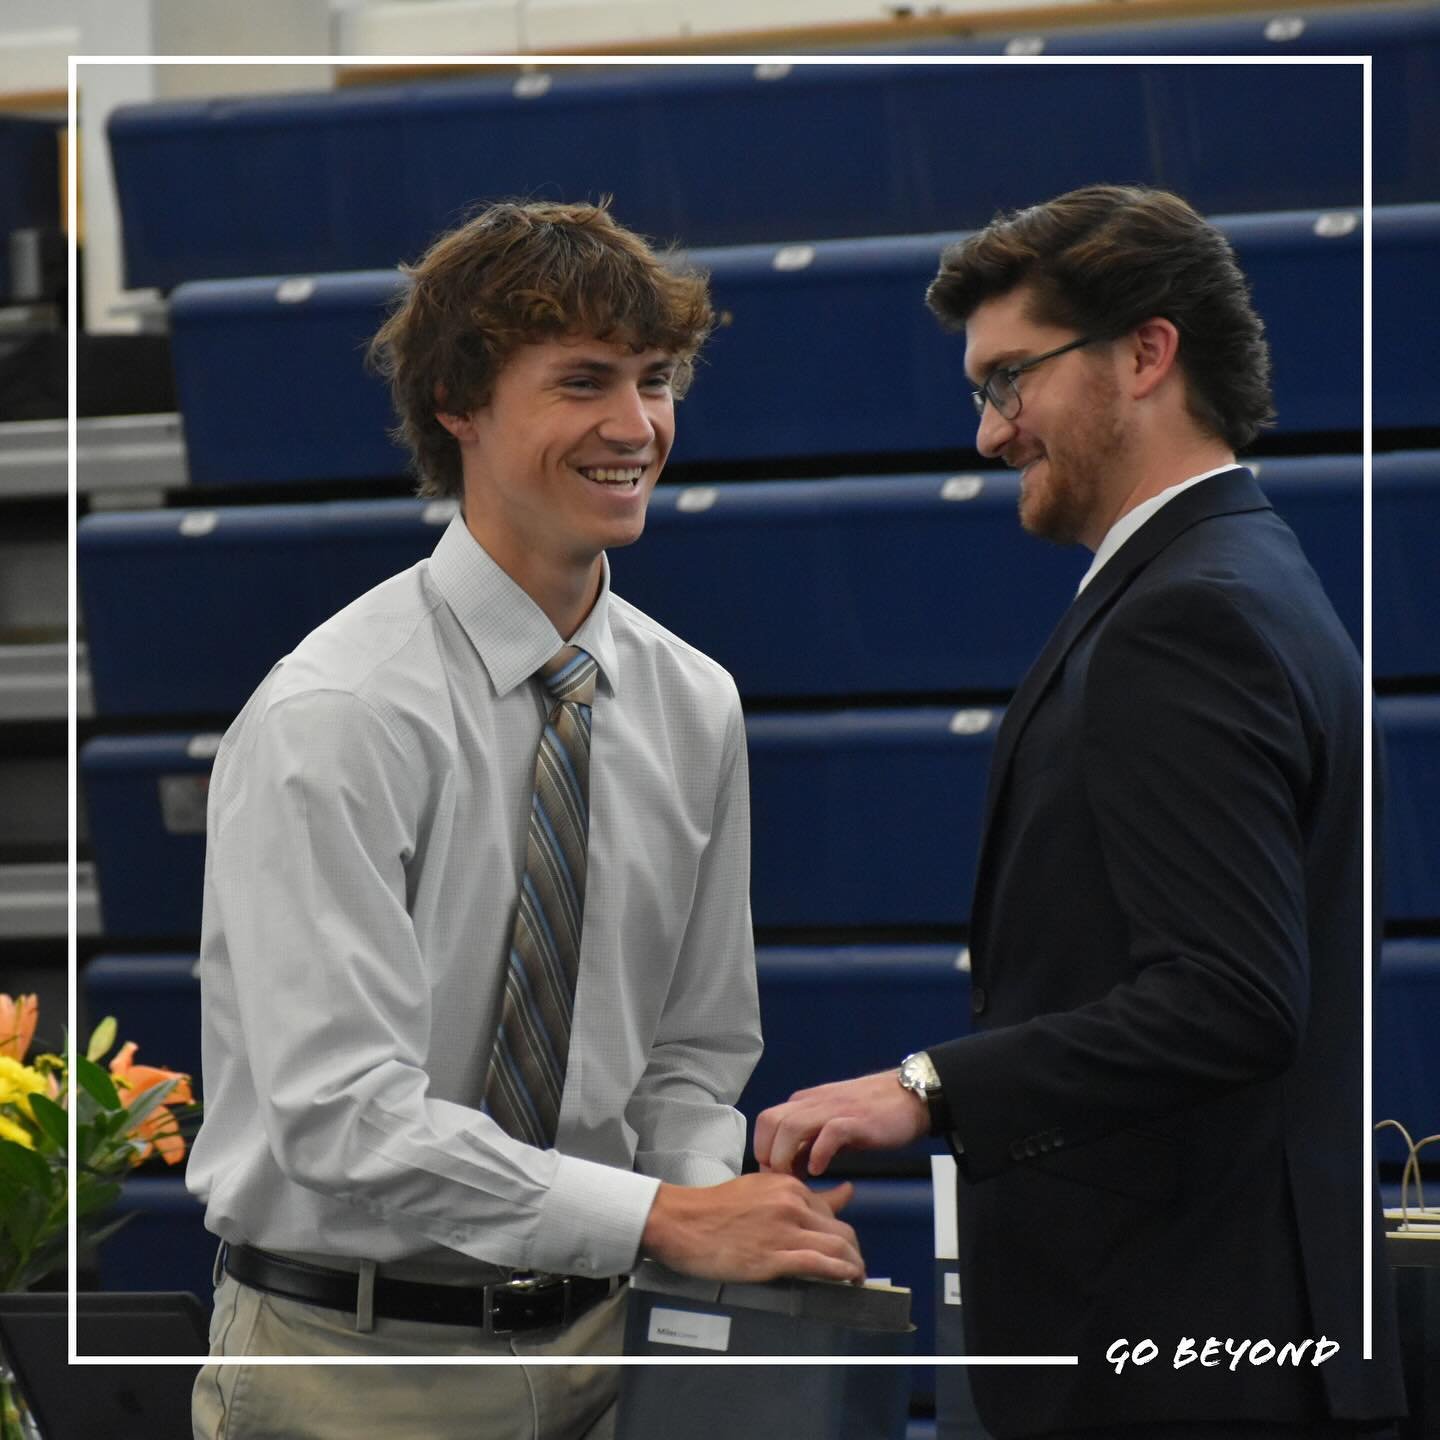 Yesterday, the Senior Class of 2024 enjoyed a luncheon with their parents to celebrate all of their achievements throughout their four years at Oldenburg Academy! Many students were recognized for receiving scholarship and awards and all students wer